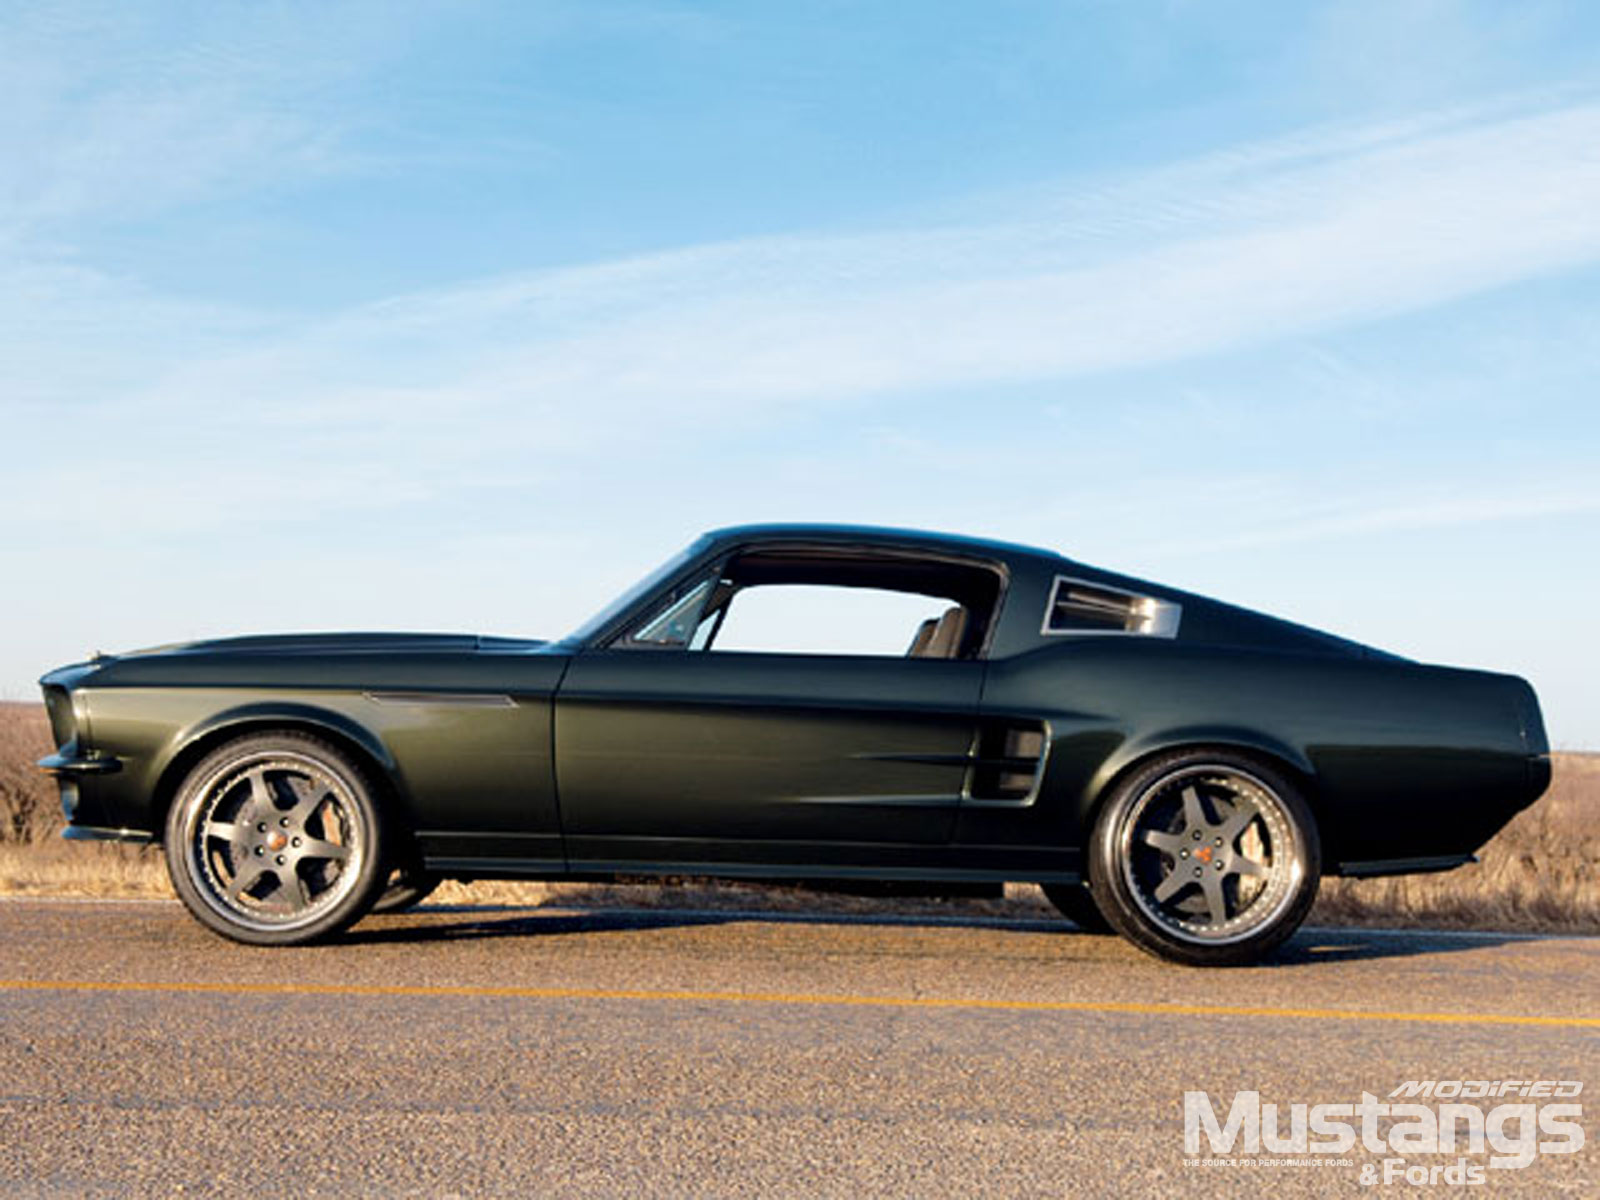 Ford Mustang 1967 Side - HD Wallpaper 